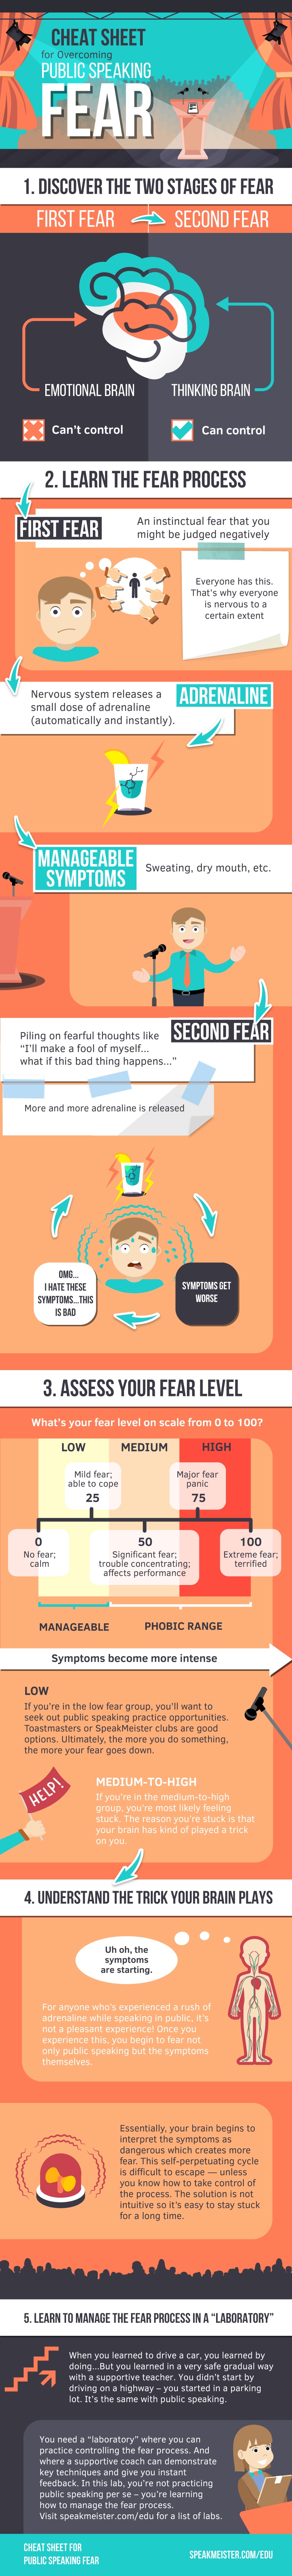 How to Overcome Public Speaking Fear Infographic